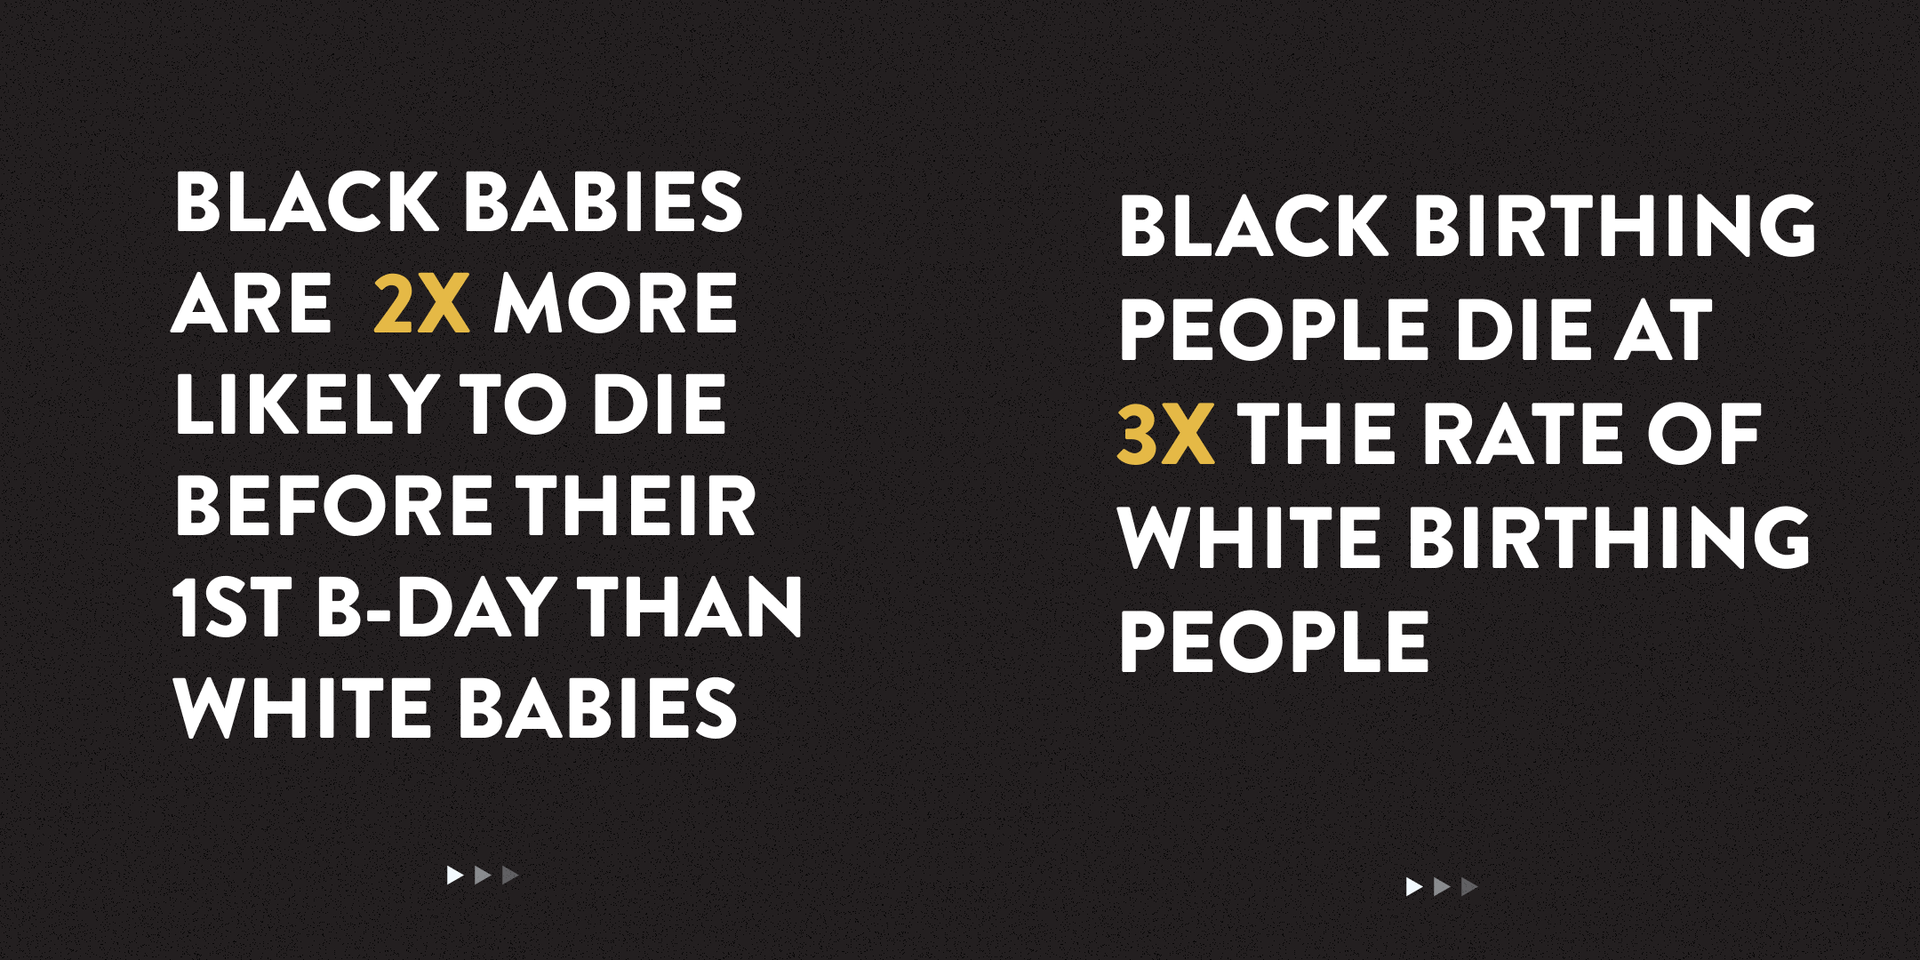 Graphic that says 'Black babies are 2x more likely to die before their first b-day than white babies' and 'Black birthing people die at 3x the rate of white birthing people'